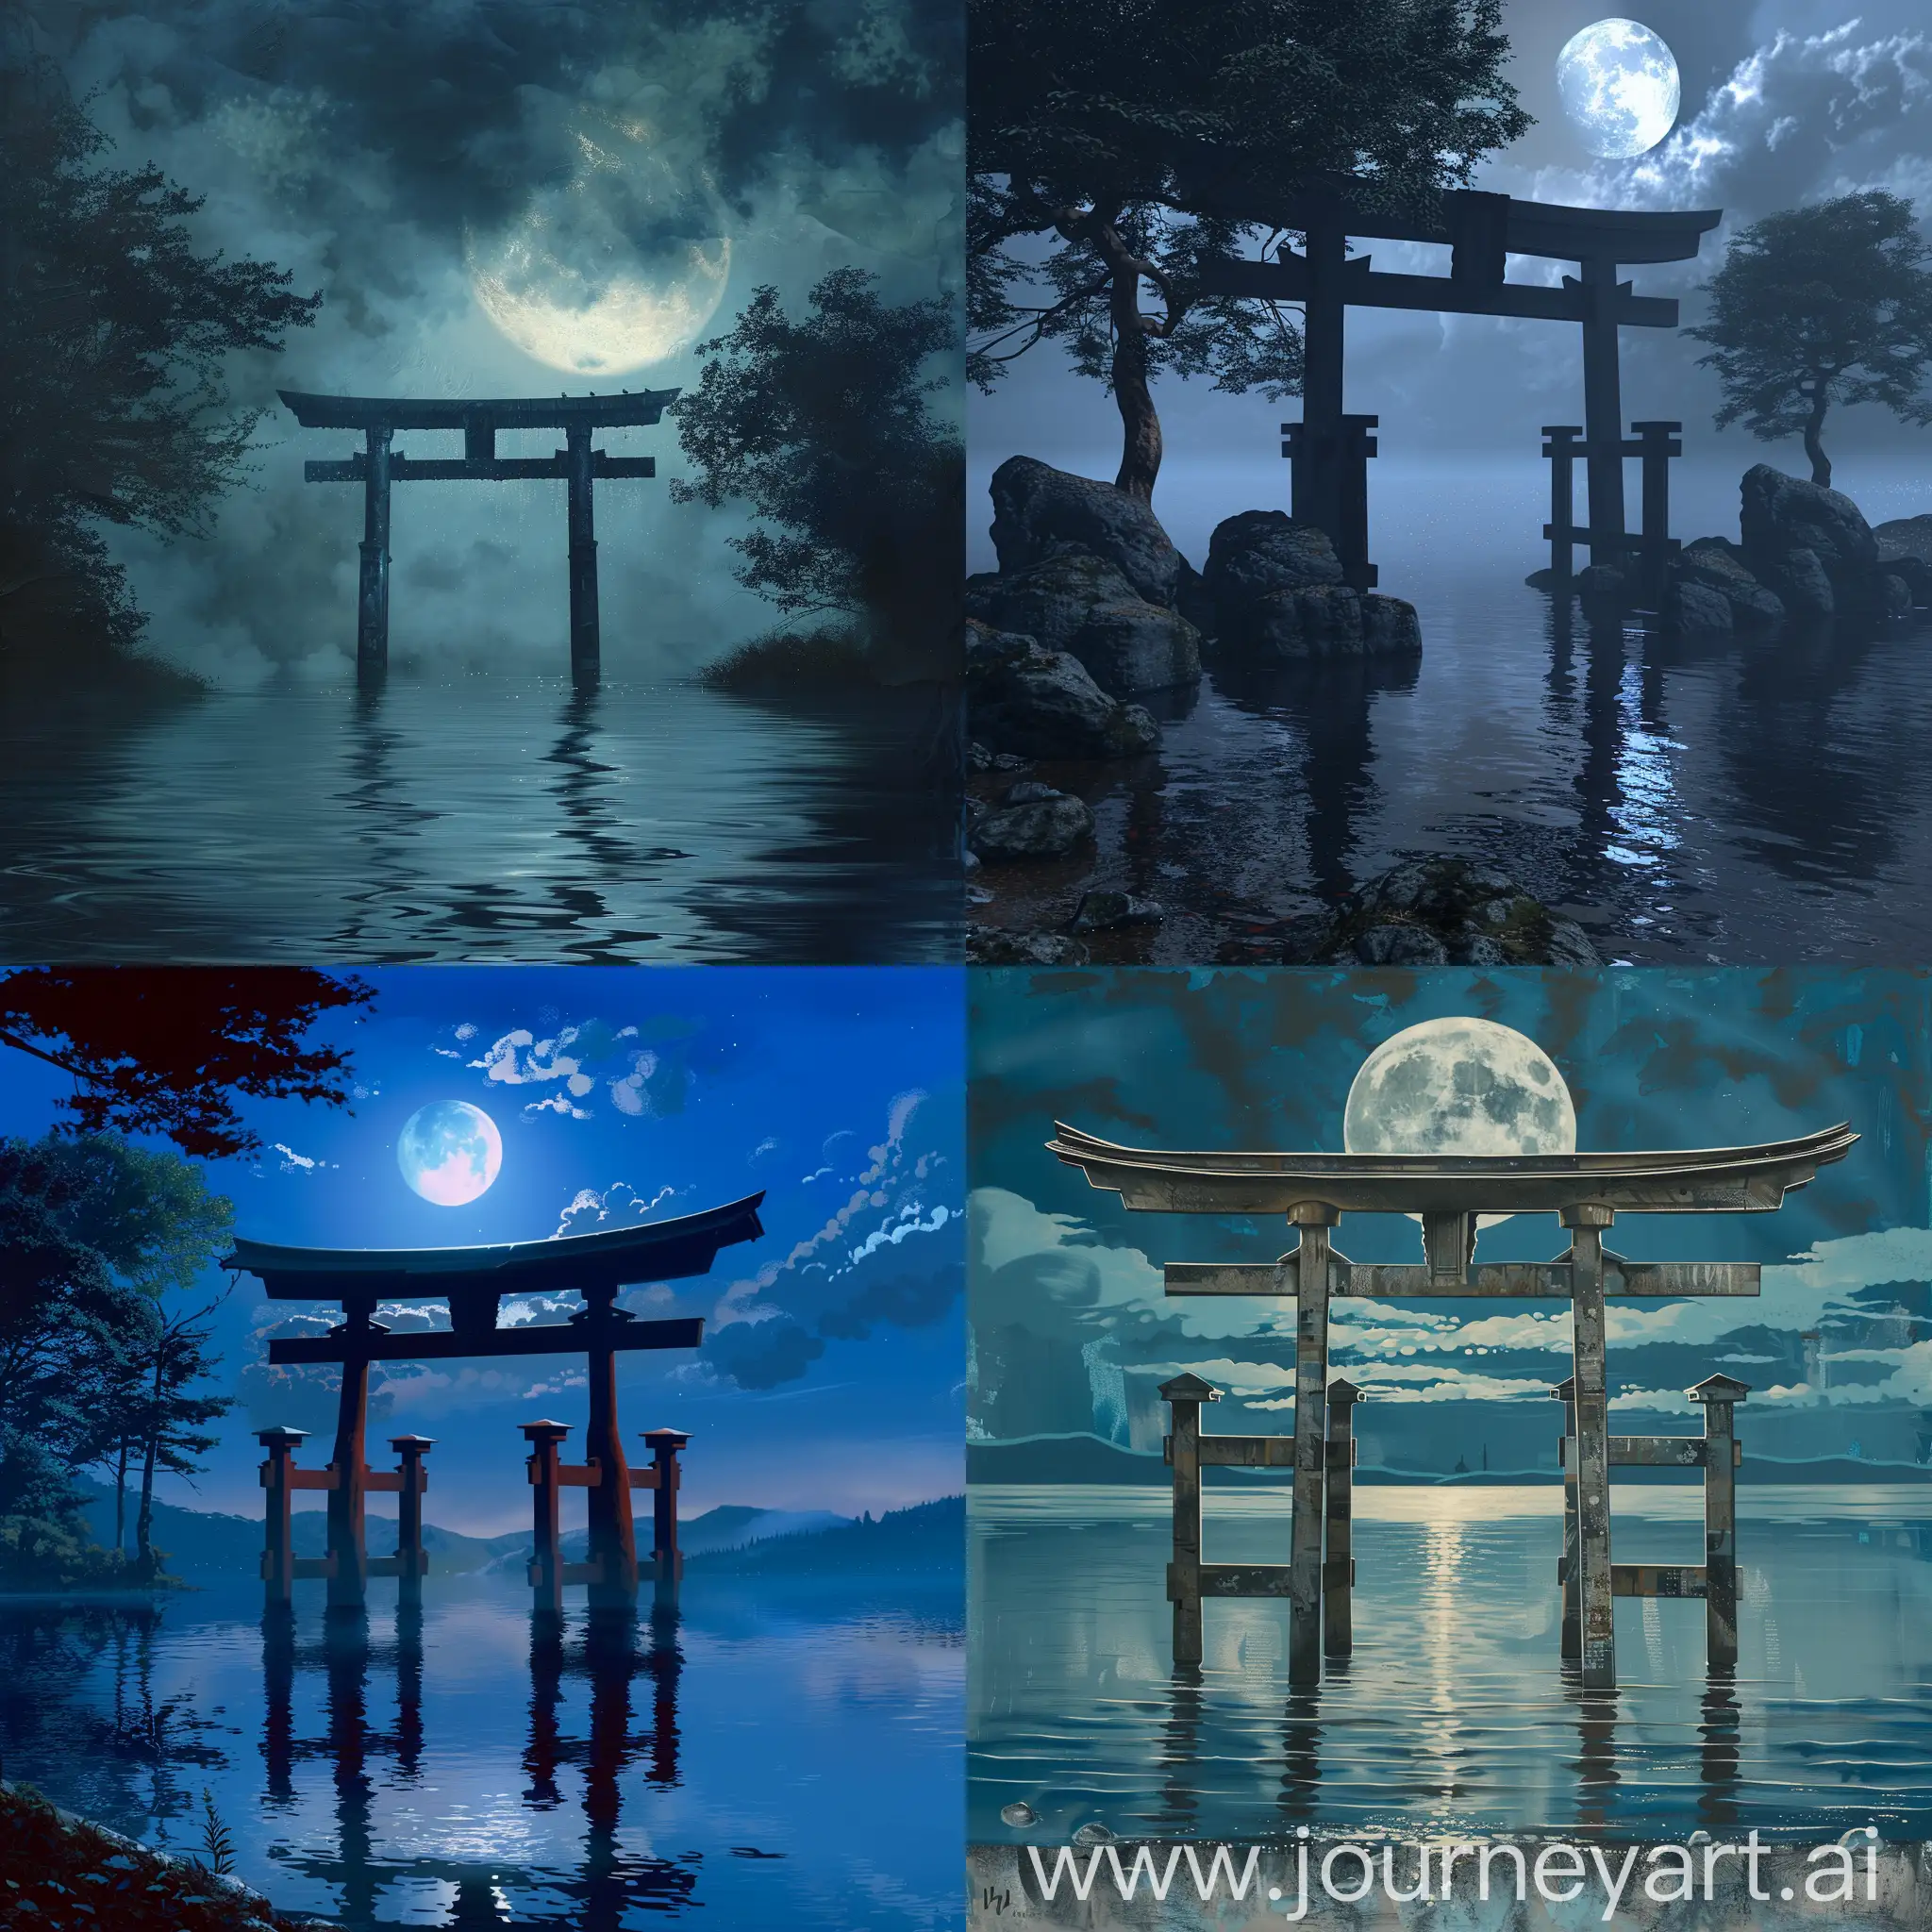 Japanese gate under moonlight in the water